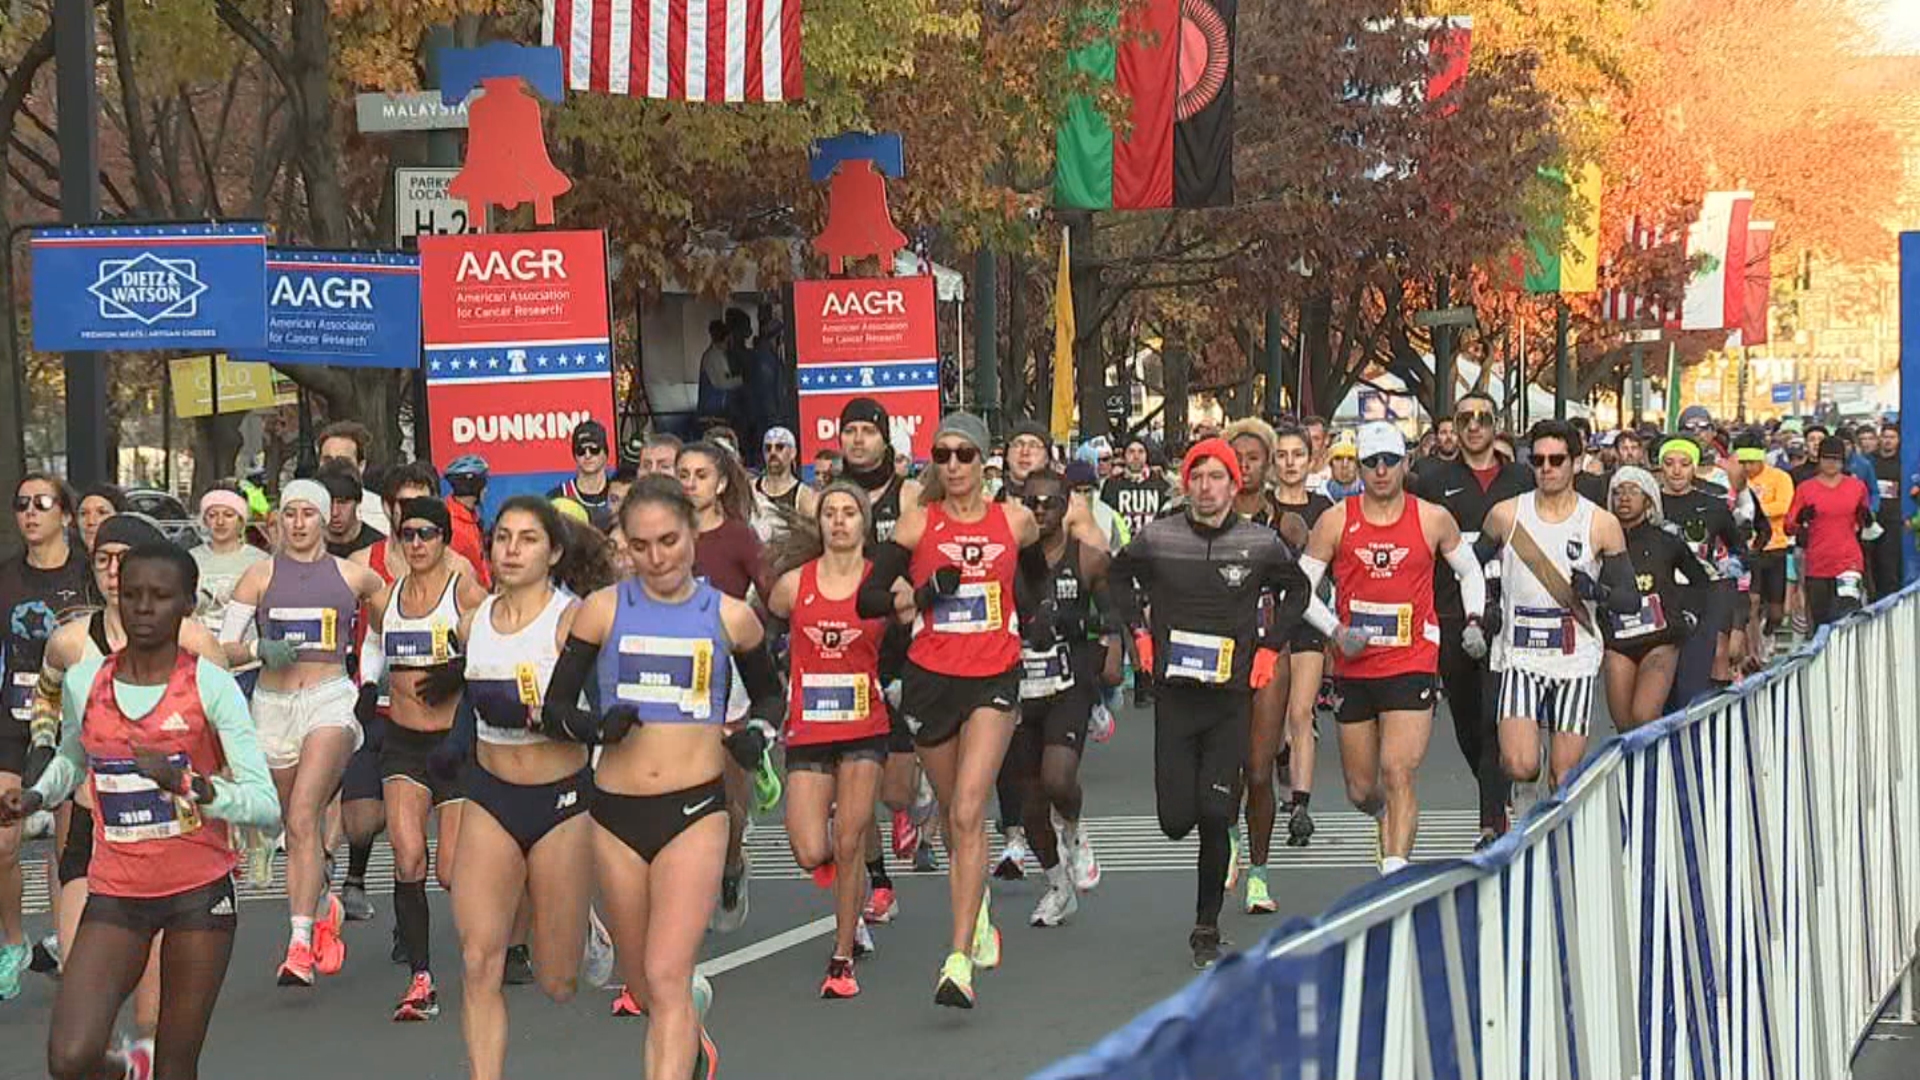 Philadelphia Marathon Weekend Returns After Virtual Year Due To Pandemic: 'It's Just An Awesome Mental High'